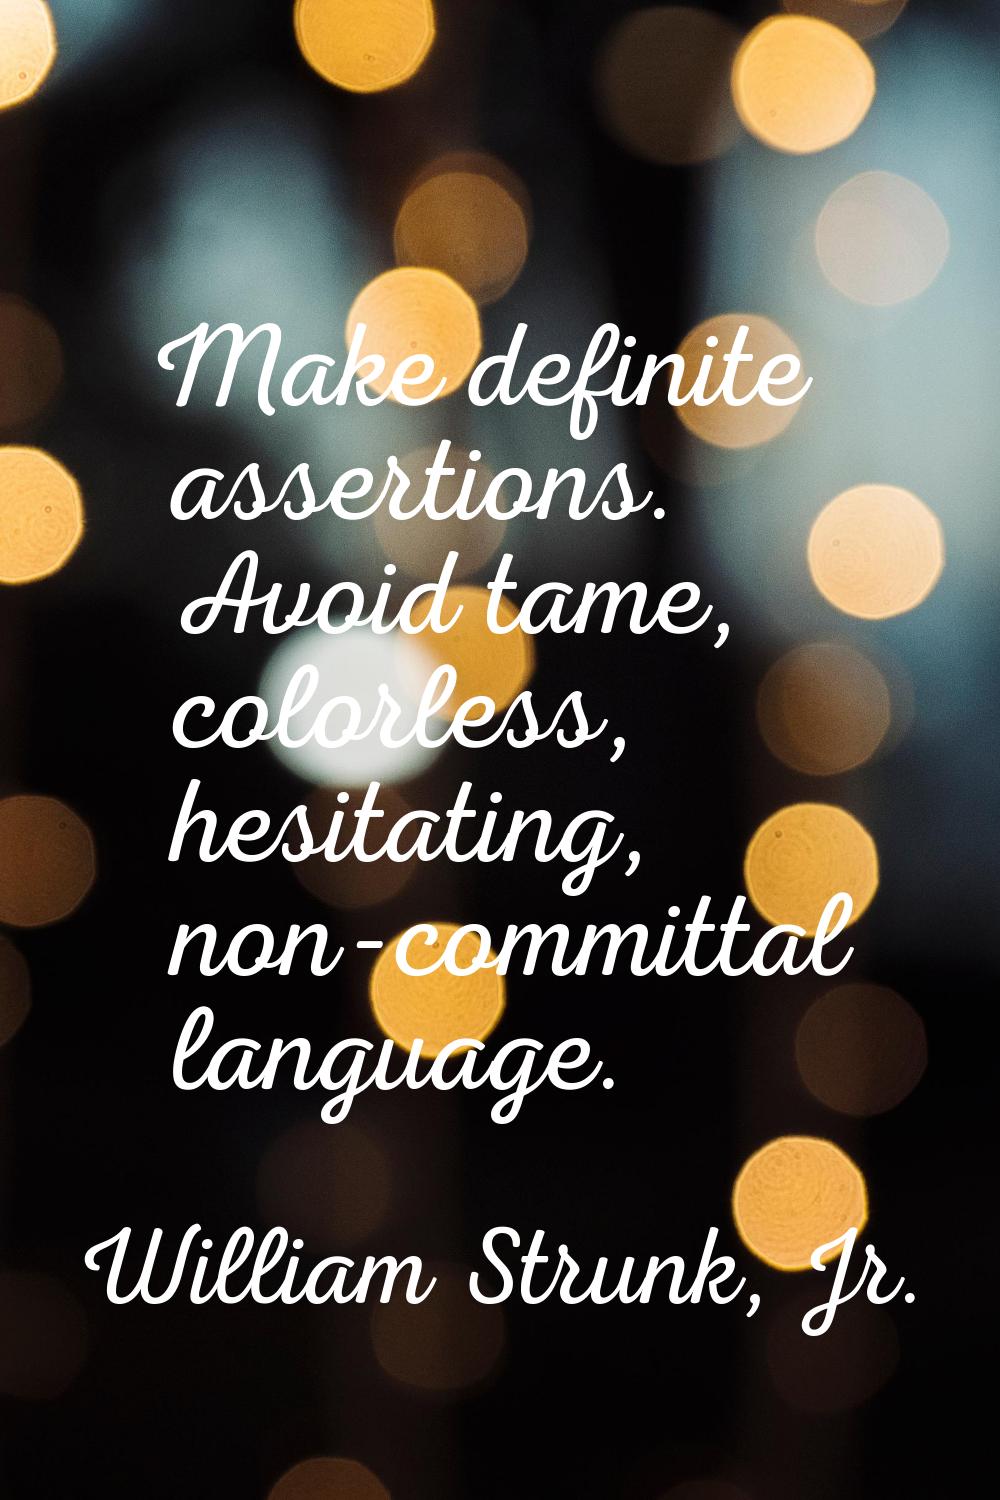 Make definite assertions. Avoid tame, colorless, hesitating, non-committal language.